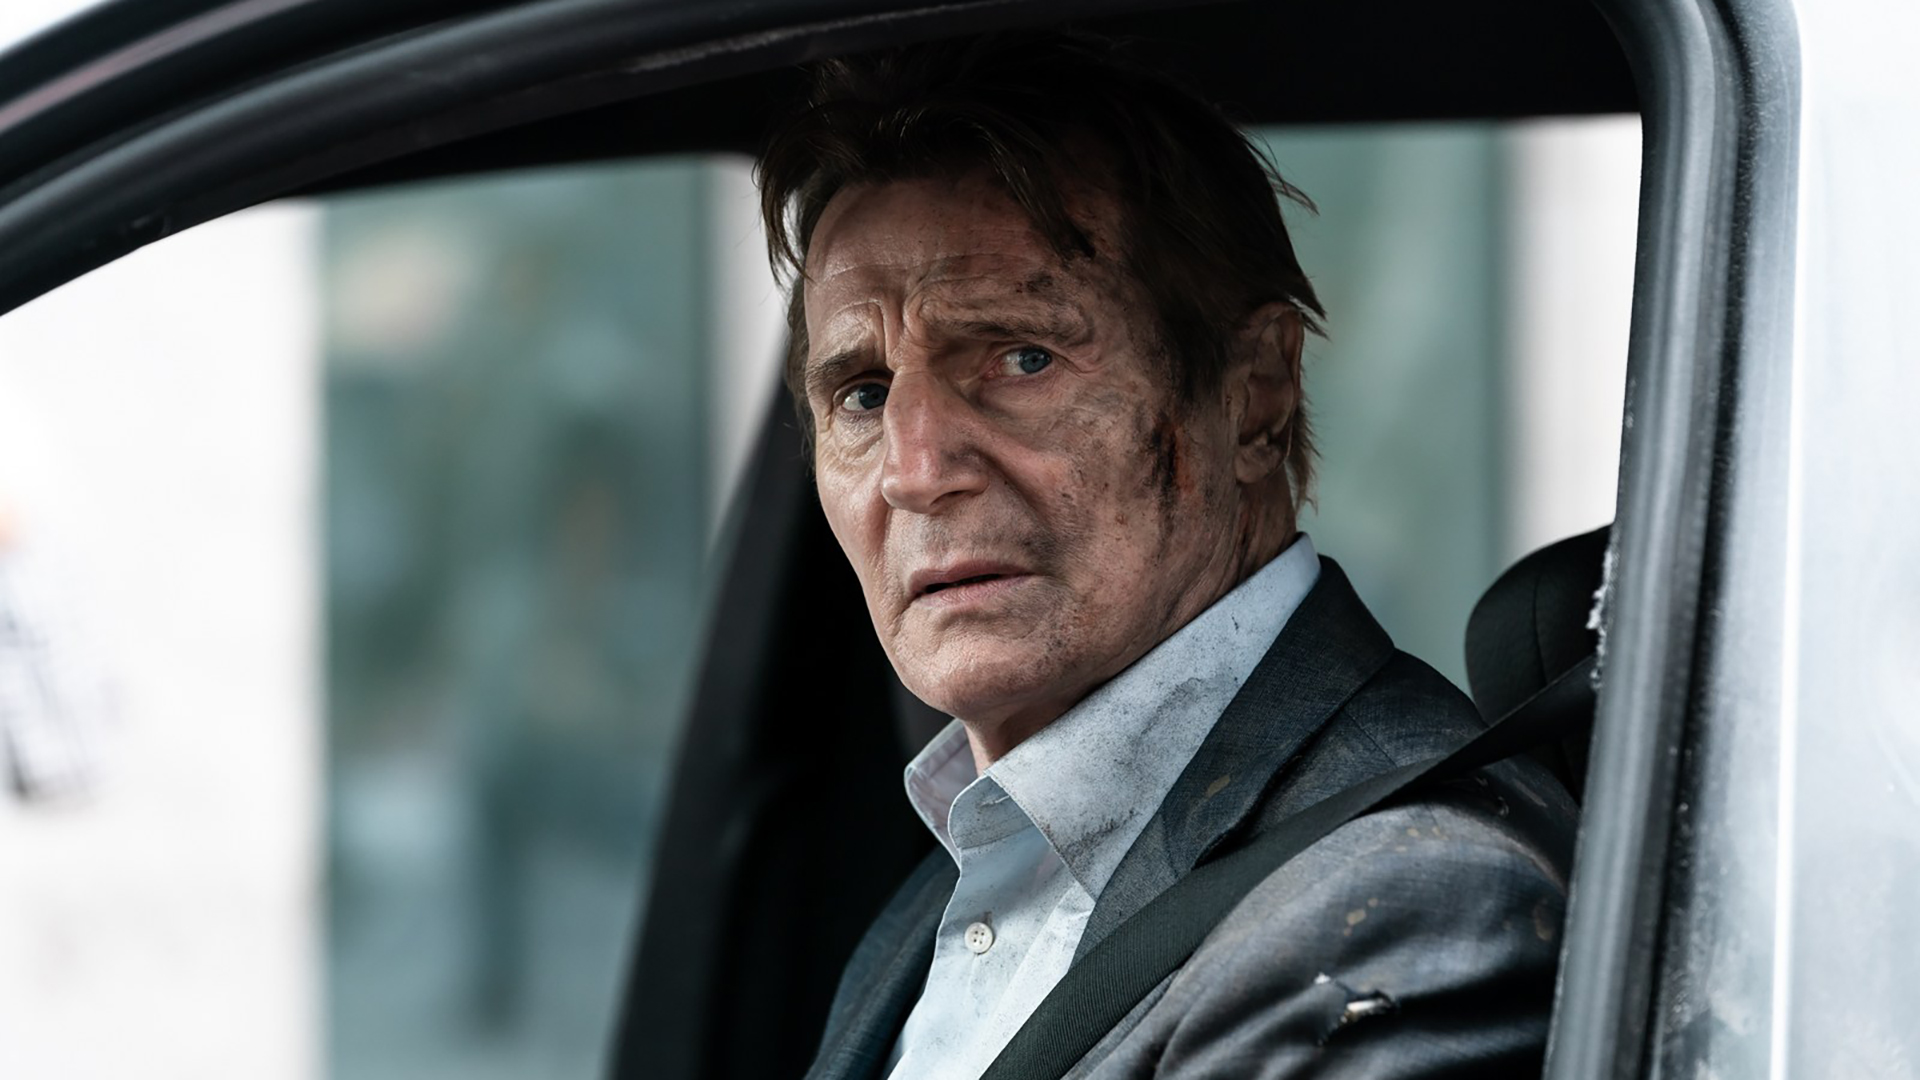 Liam Neeson looks out of a car window